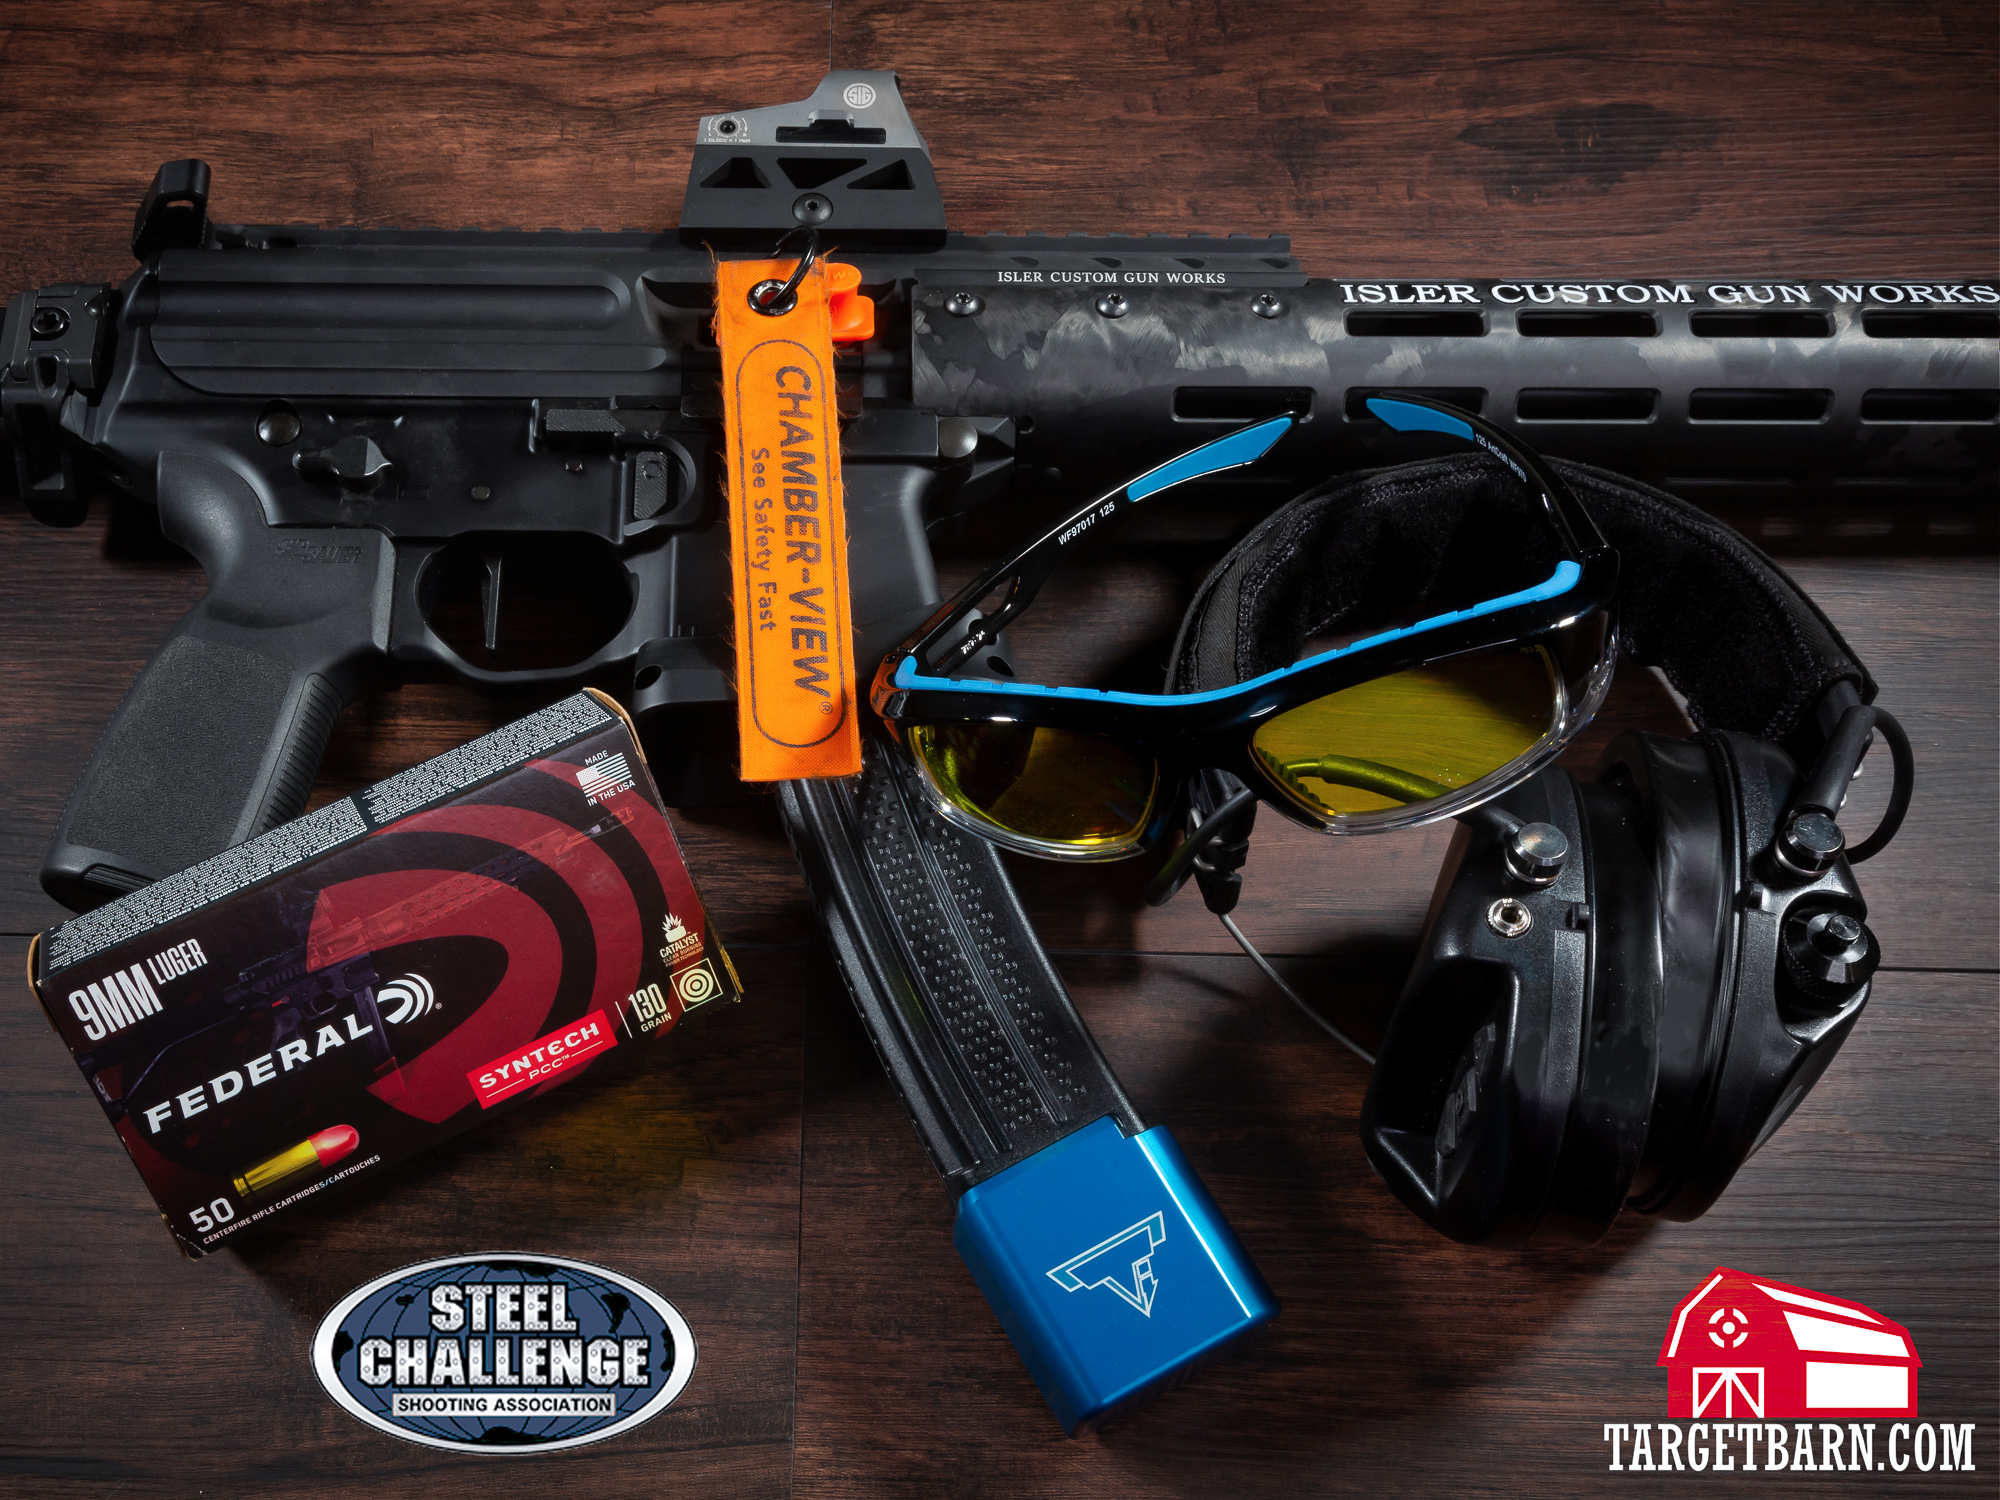 a pcc, eye protection, ear protection, chamber flag, and federal ammo